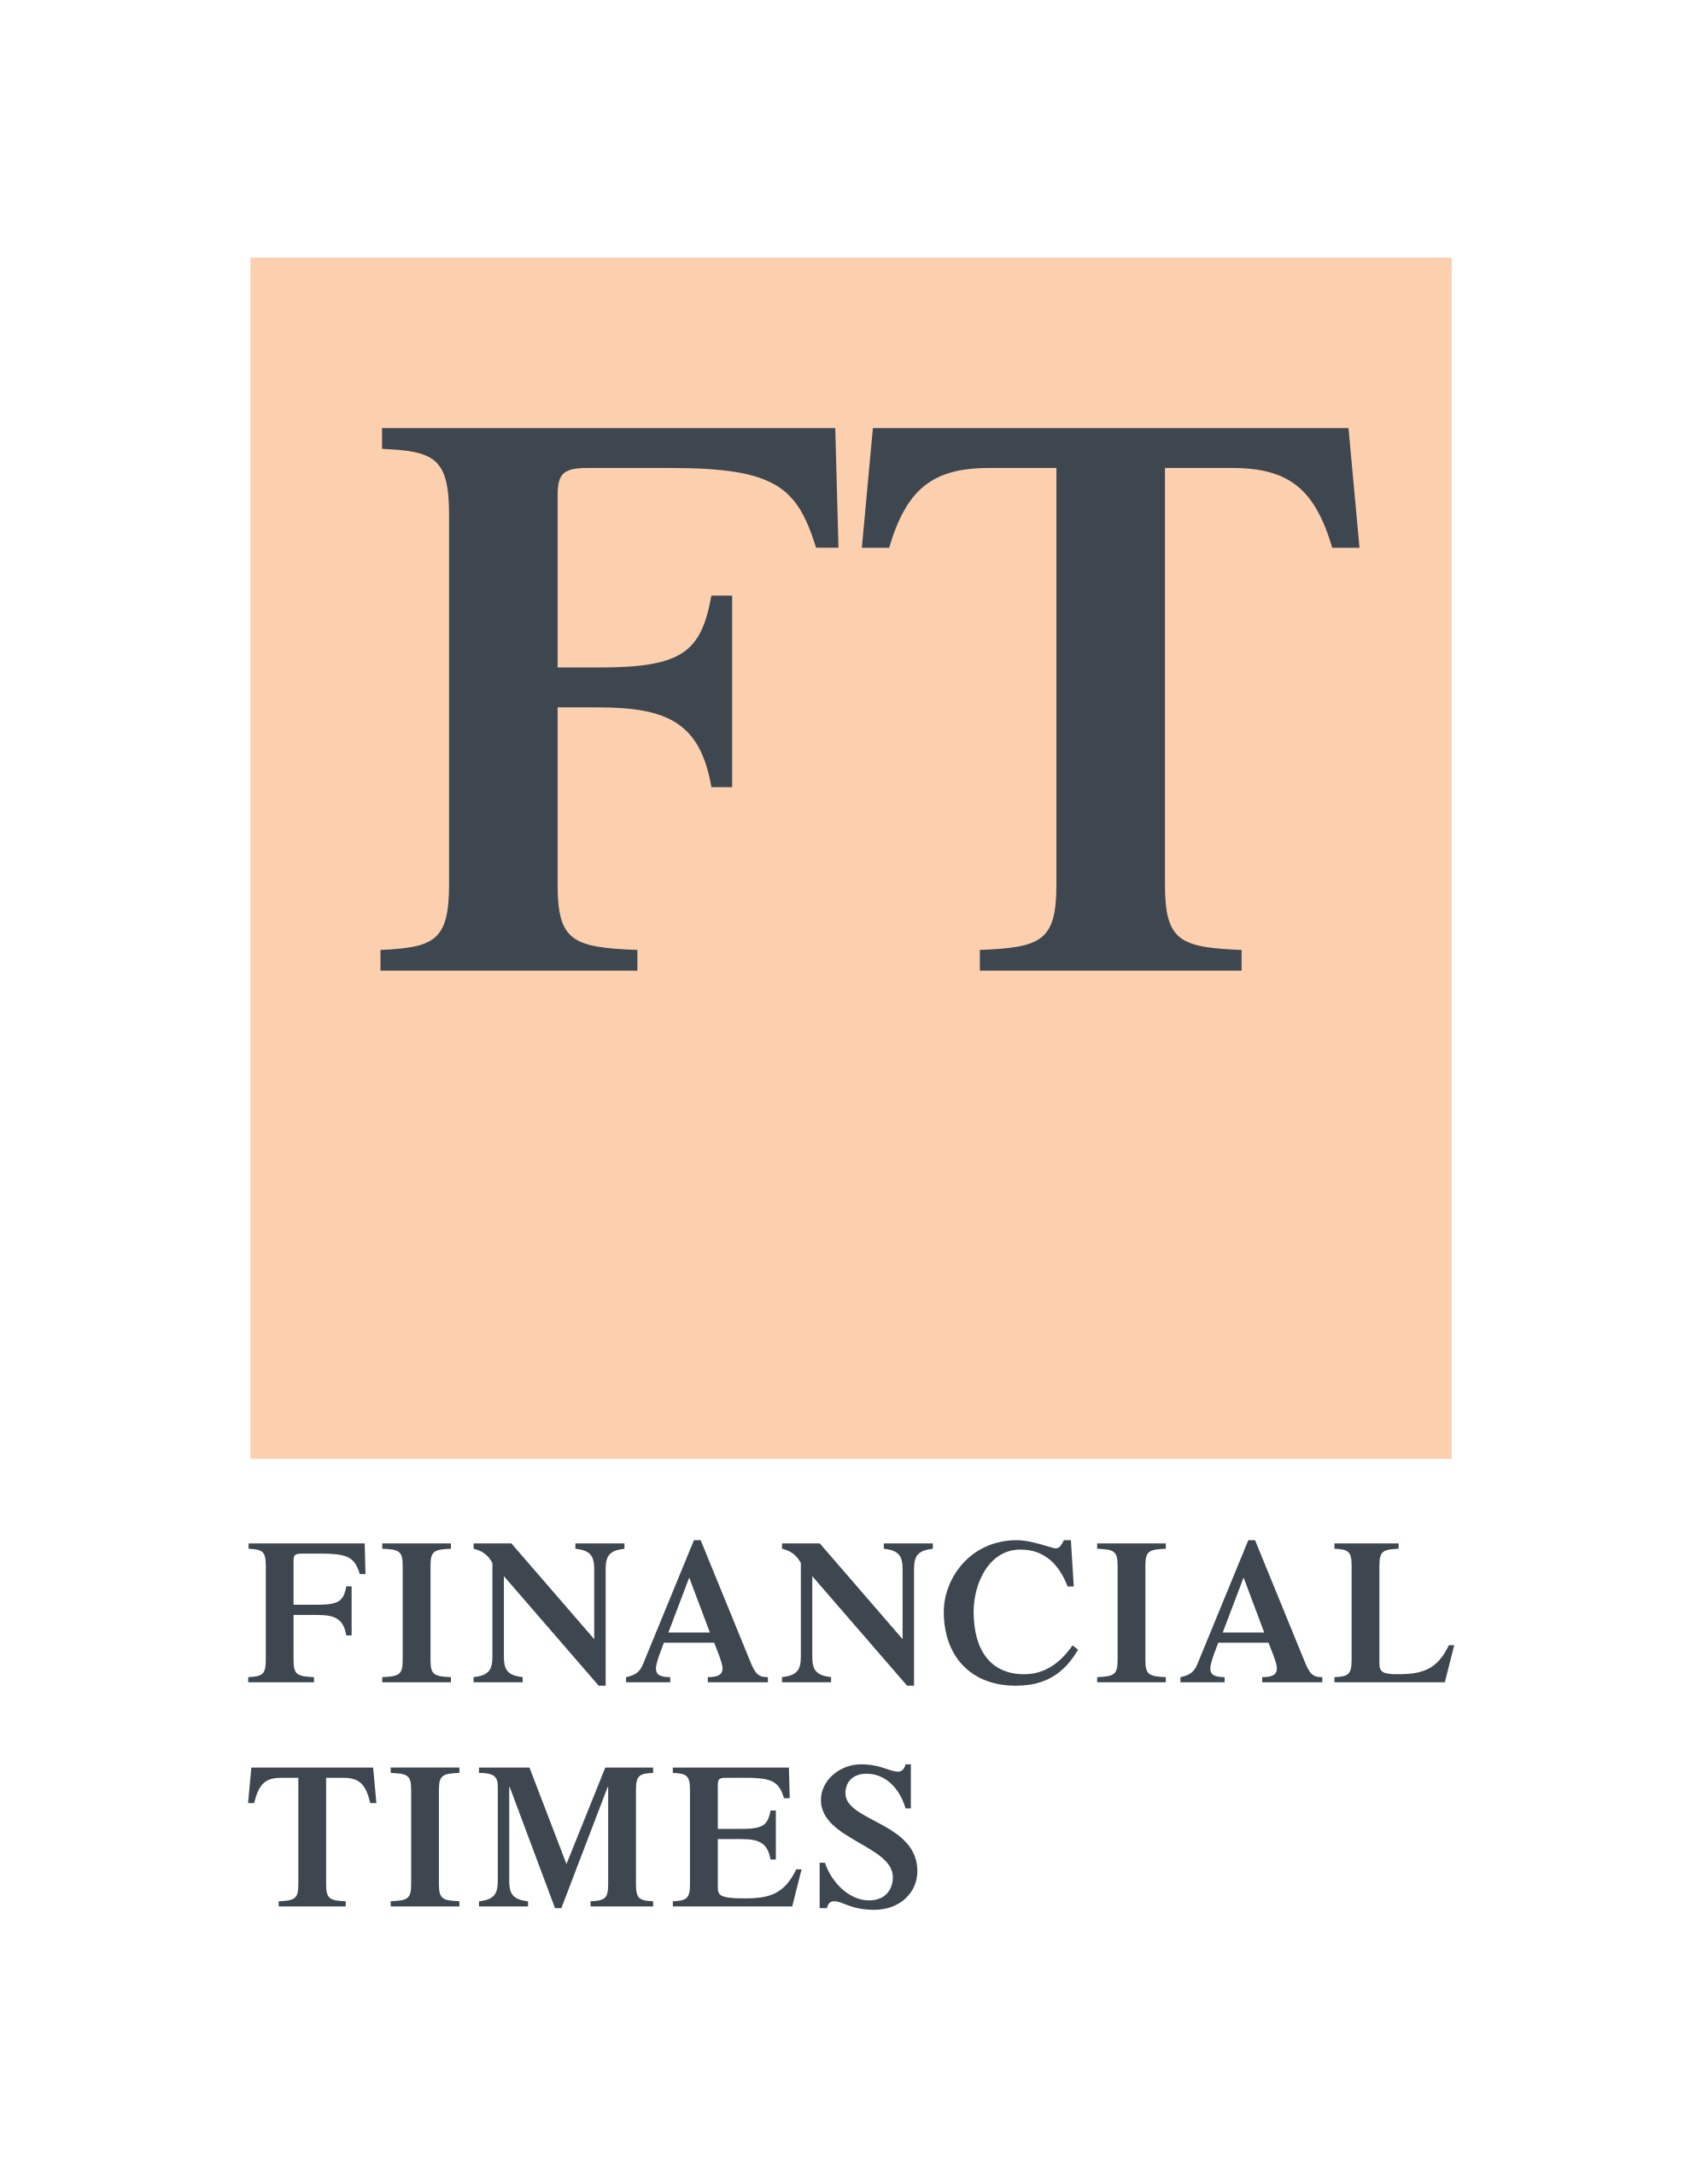 Financial_Times_corporate_logo.svg.png